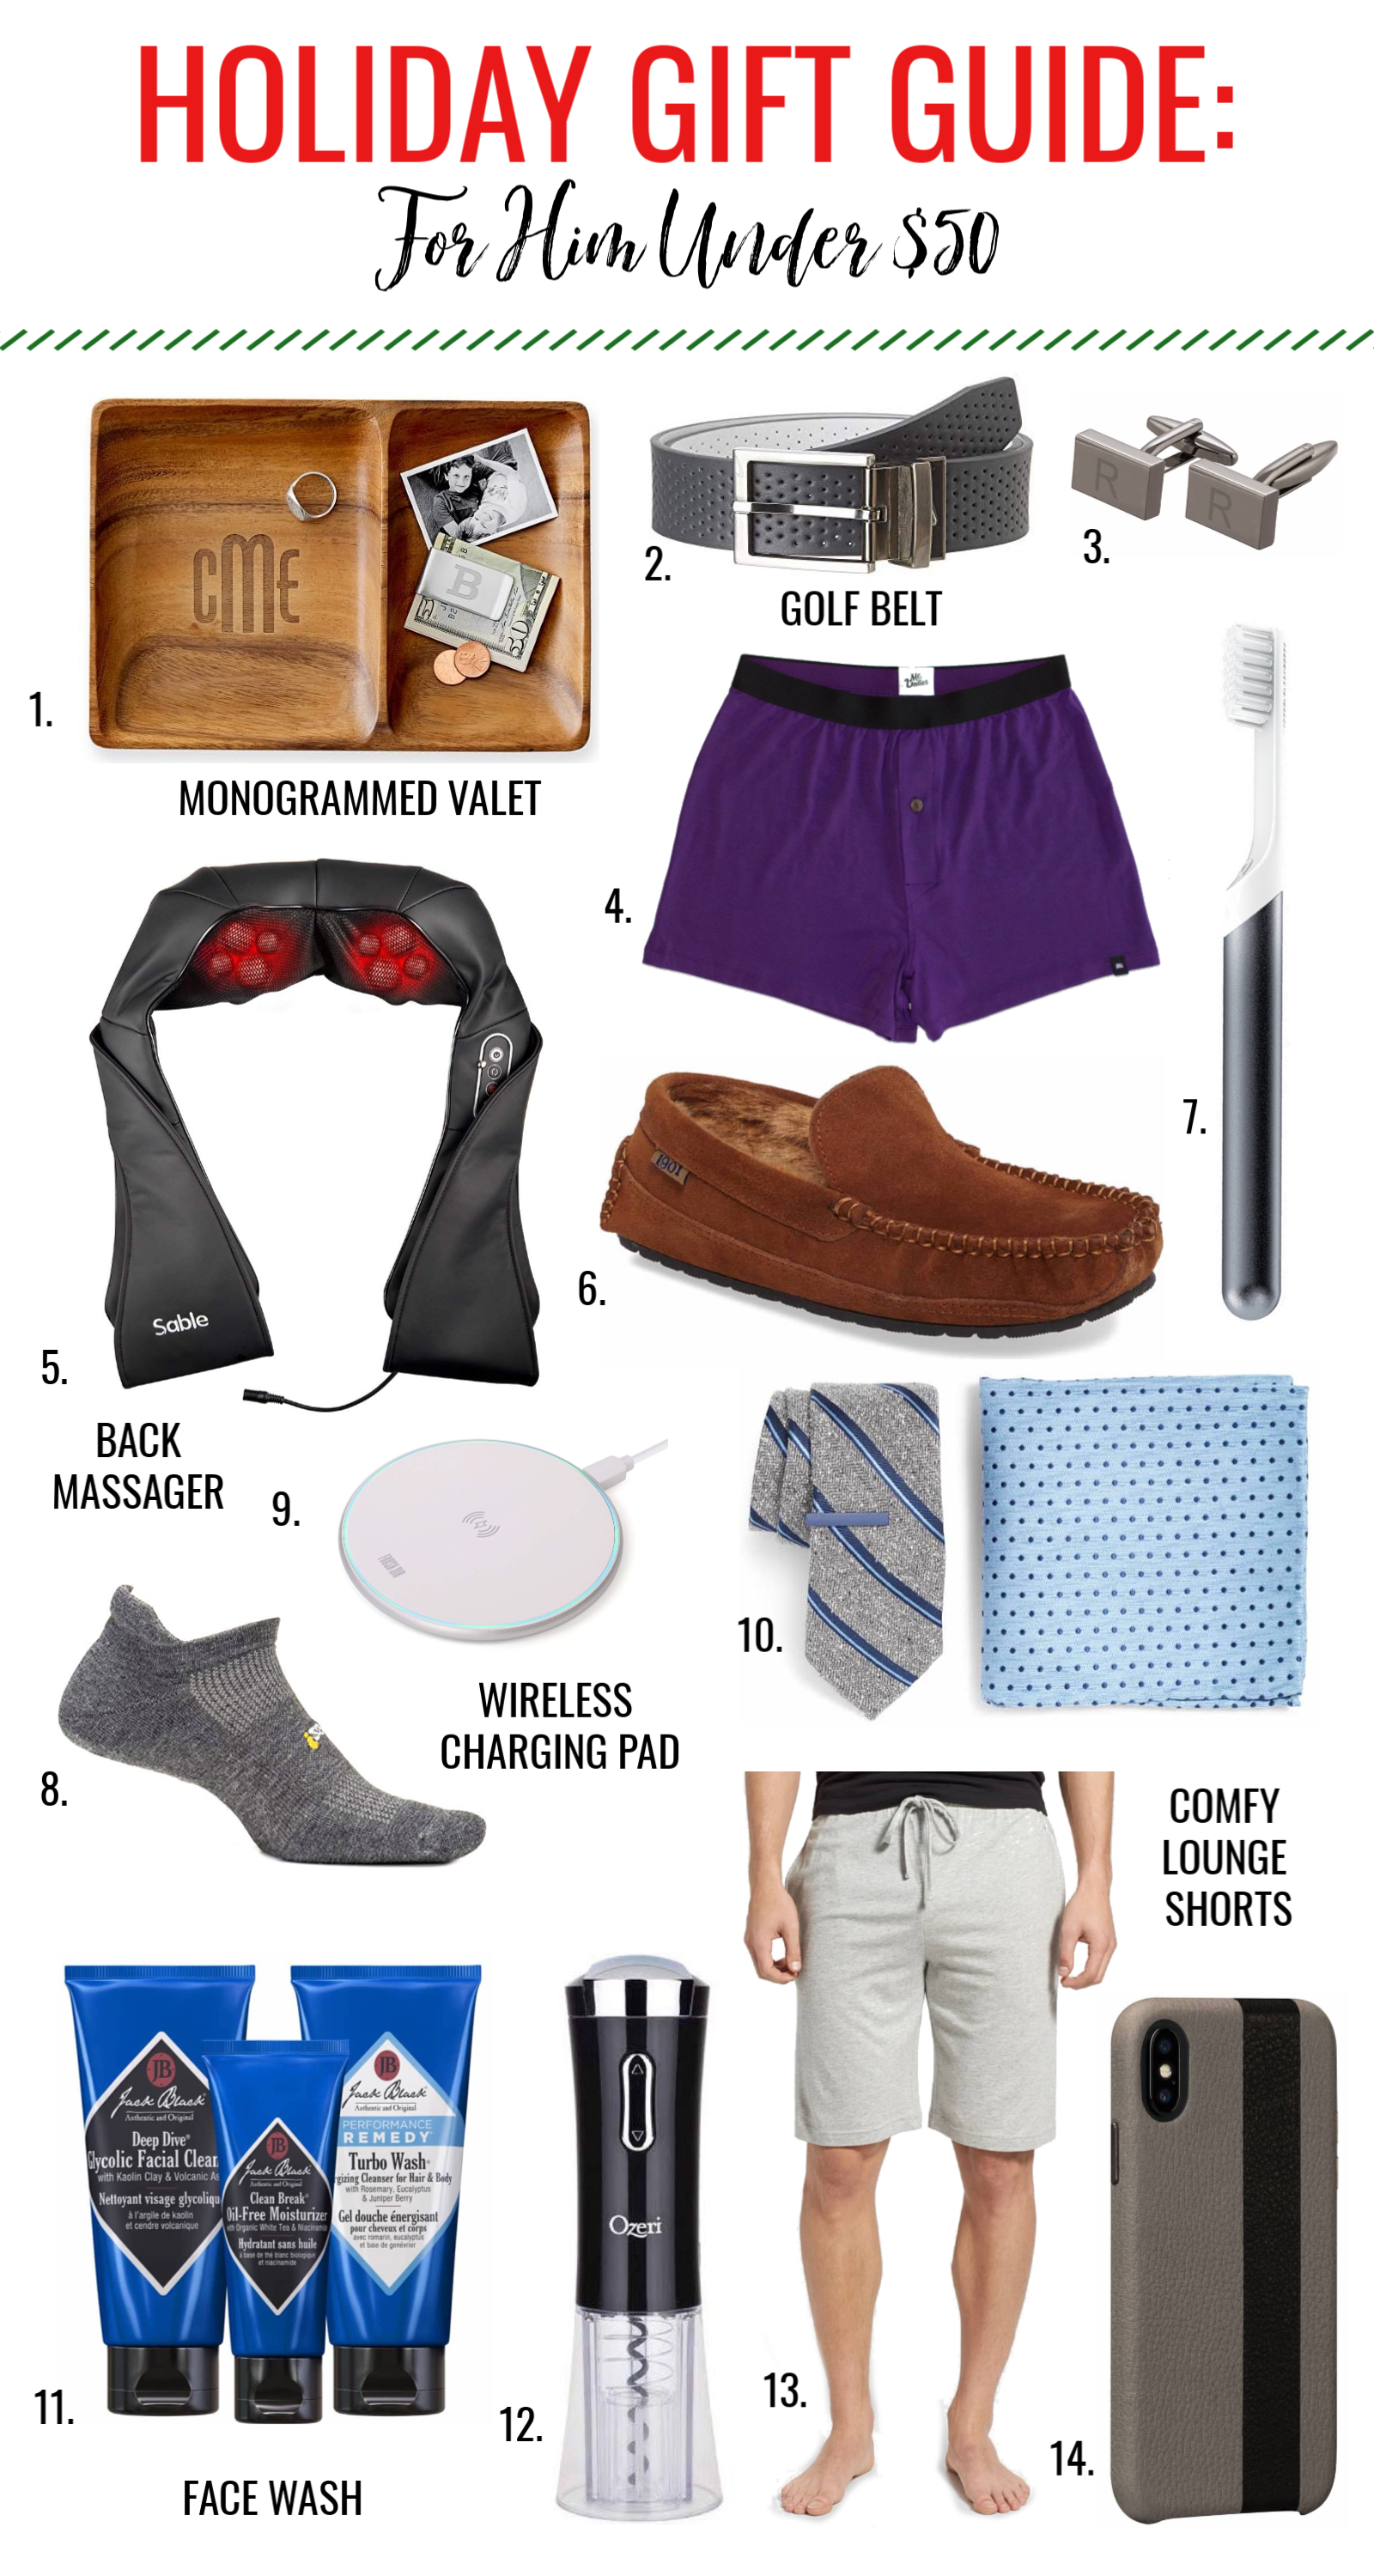 gift guide for him under $50